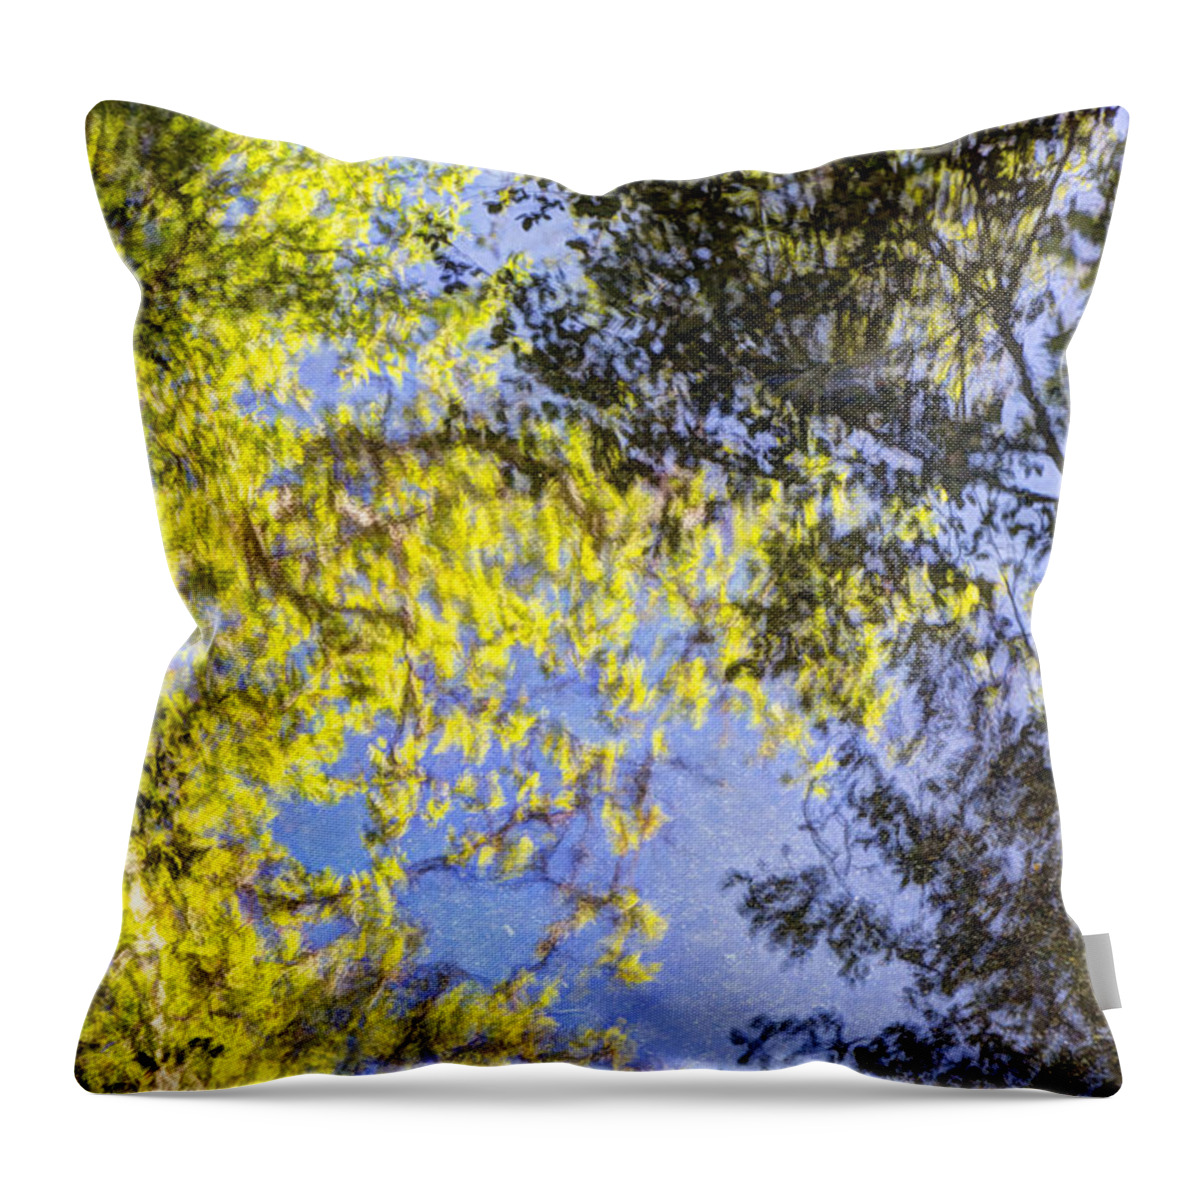  Throw Pillow featuring the photograph Looking Up Or Down by Heidi Smith